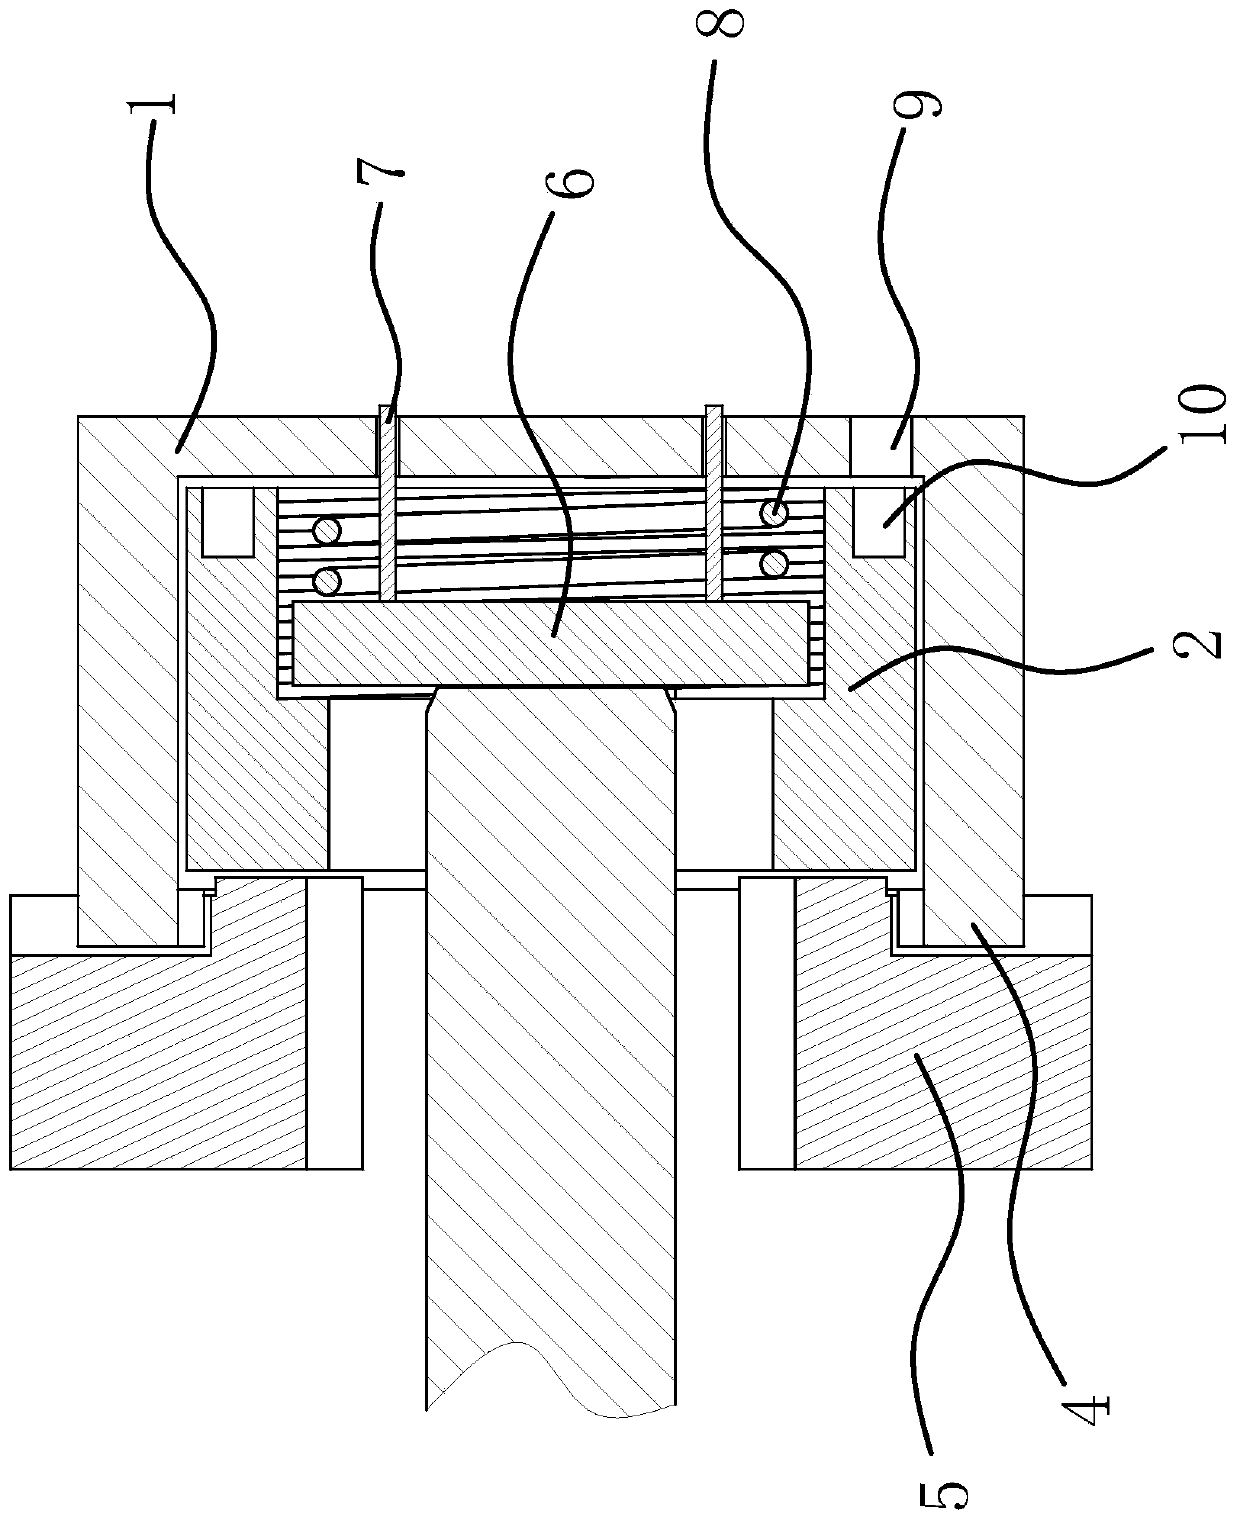 Chuck structure for rapidly clamping shaft workpieces